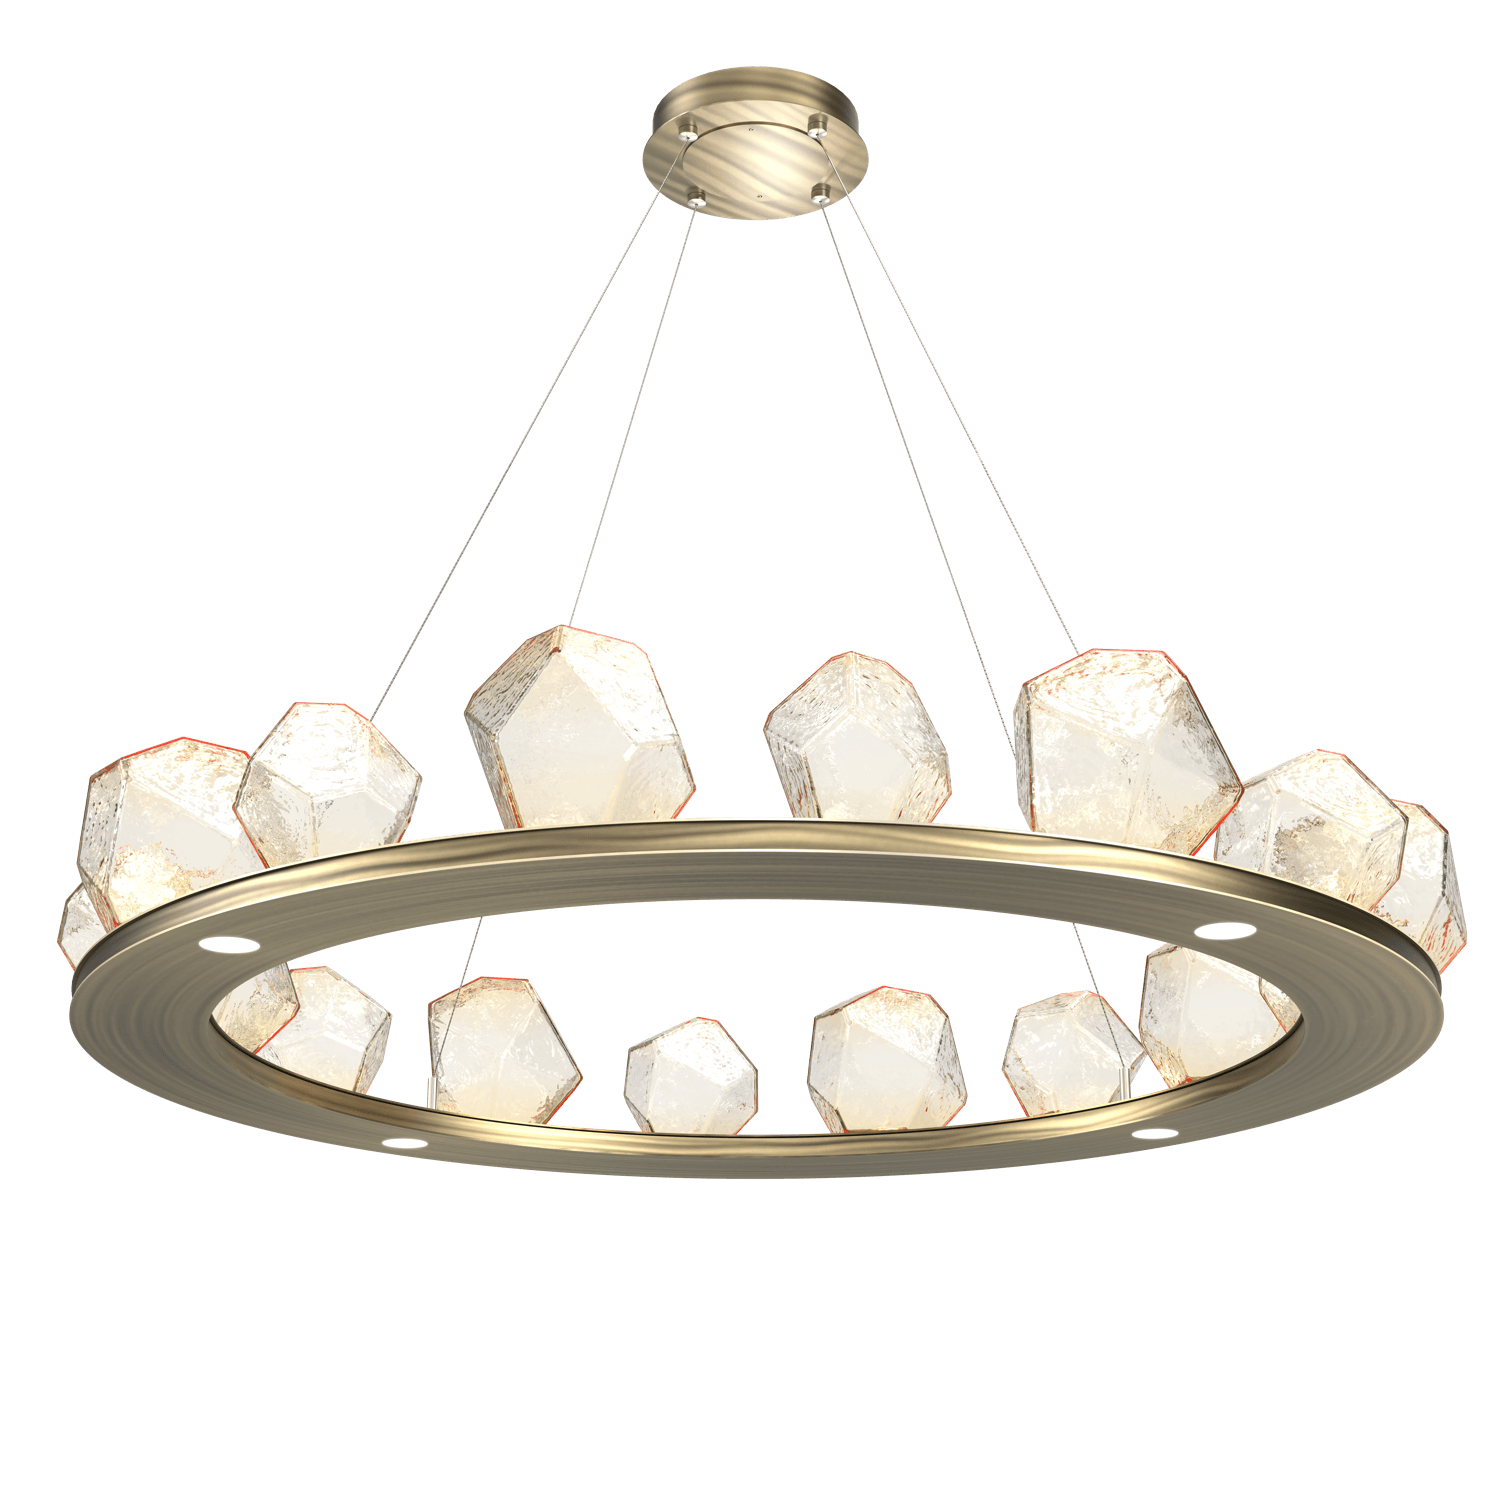 CHB0039-0D-HB-A-Hammerton-Studio-Gem-48-inch-ring-chandelier-with-heritage-brass-finish-and-amber-blown-glass-shades-and-LED-lamping